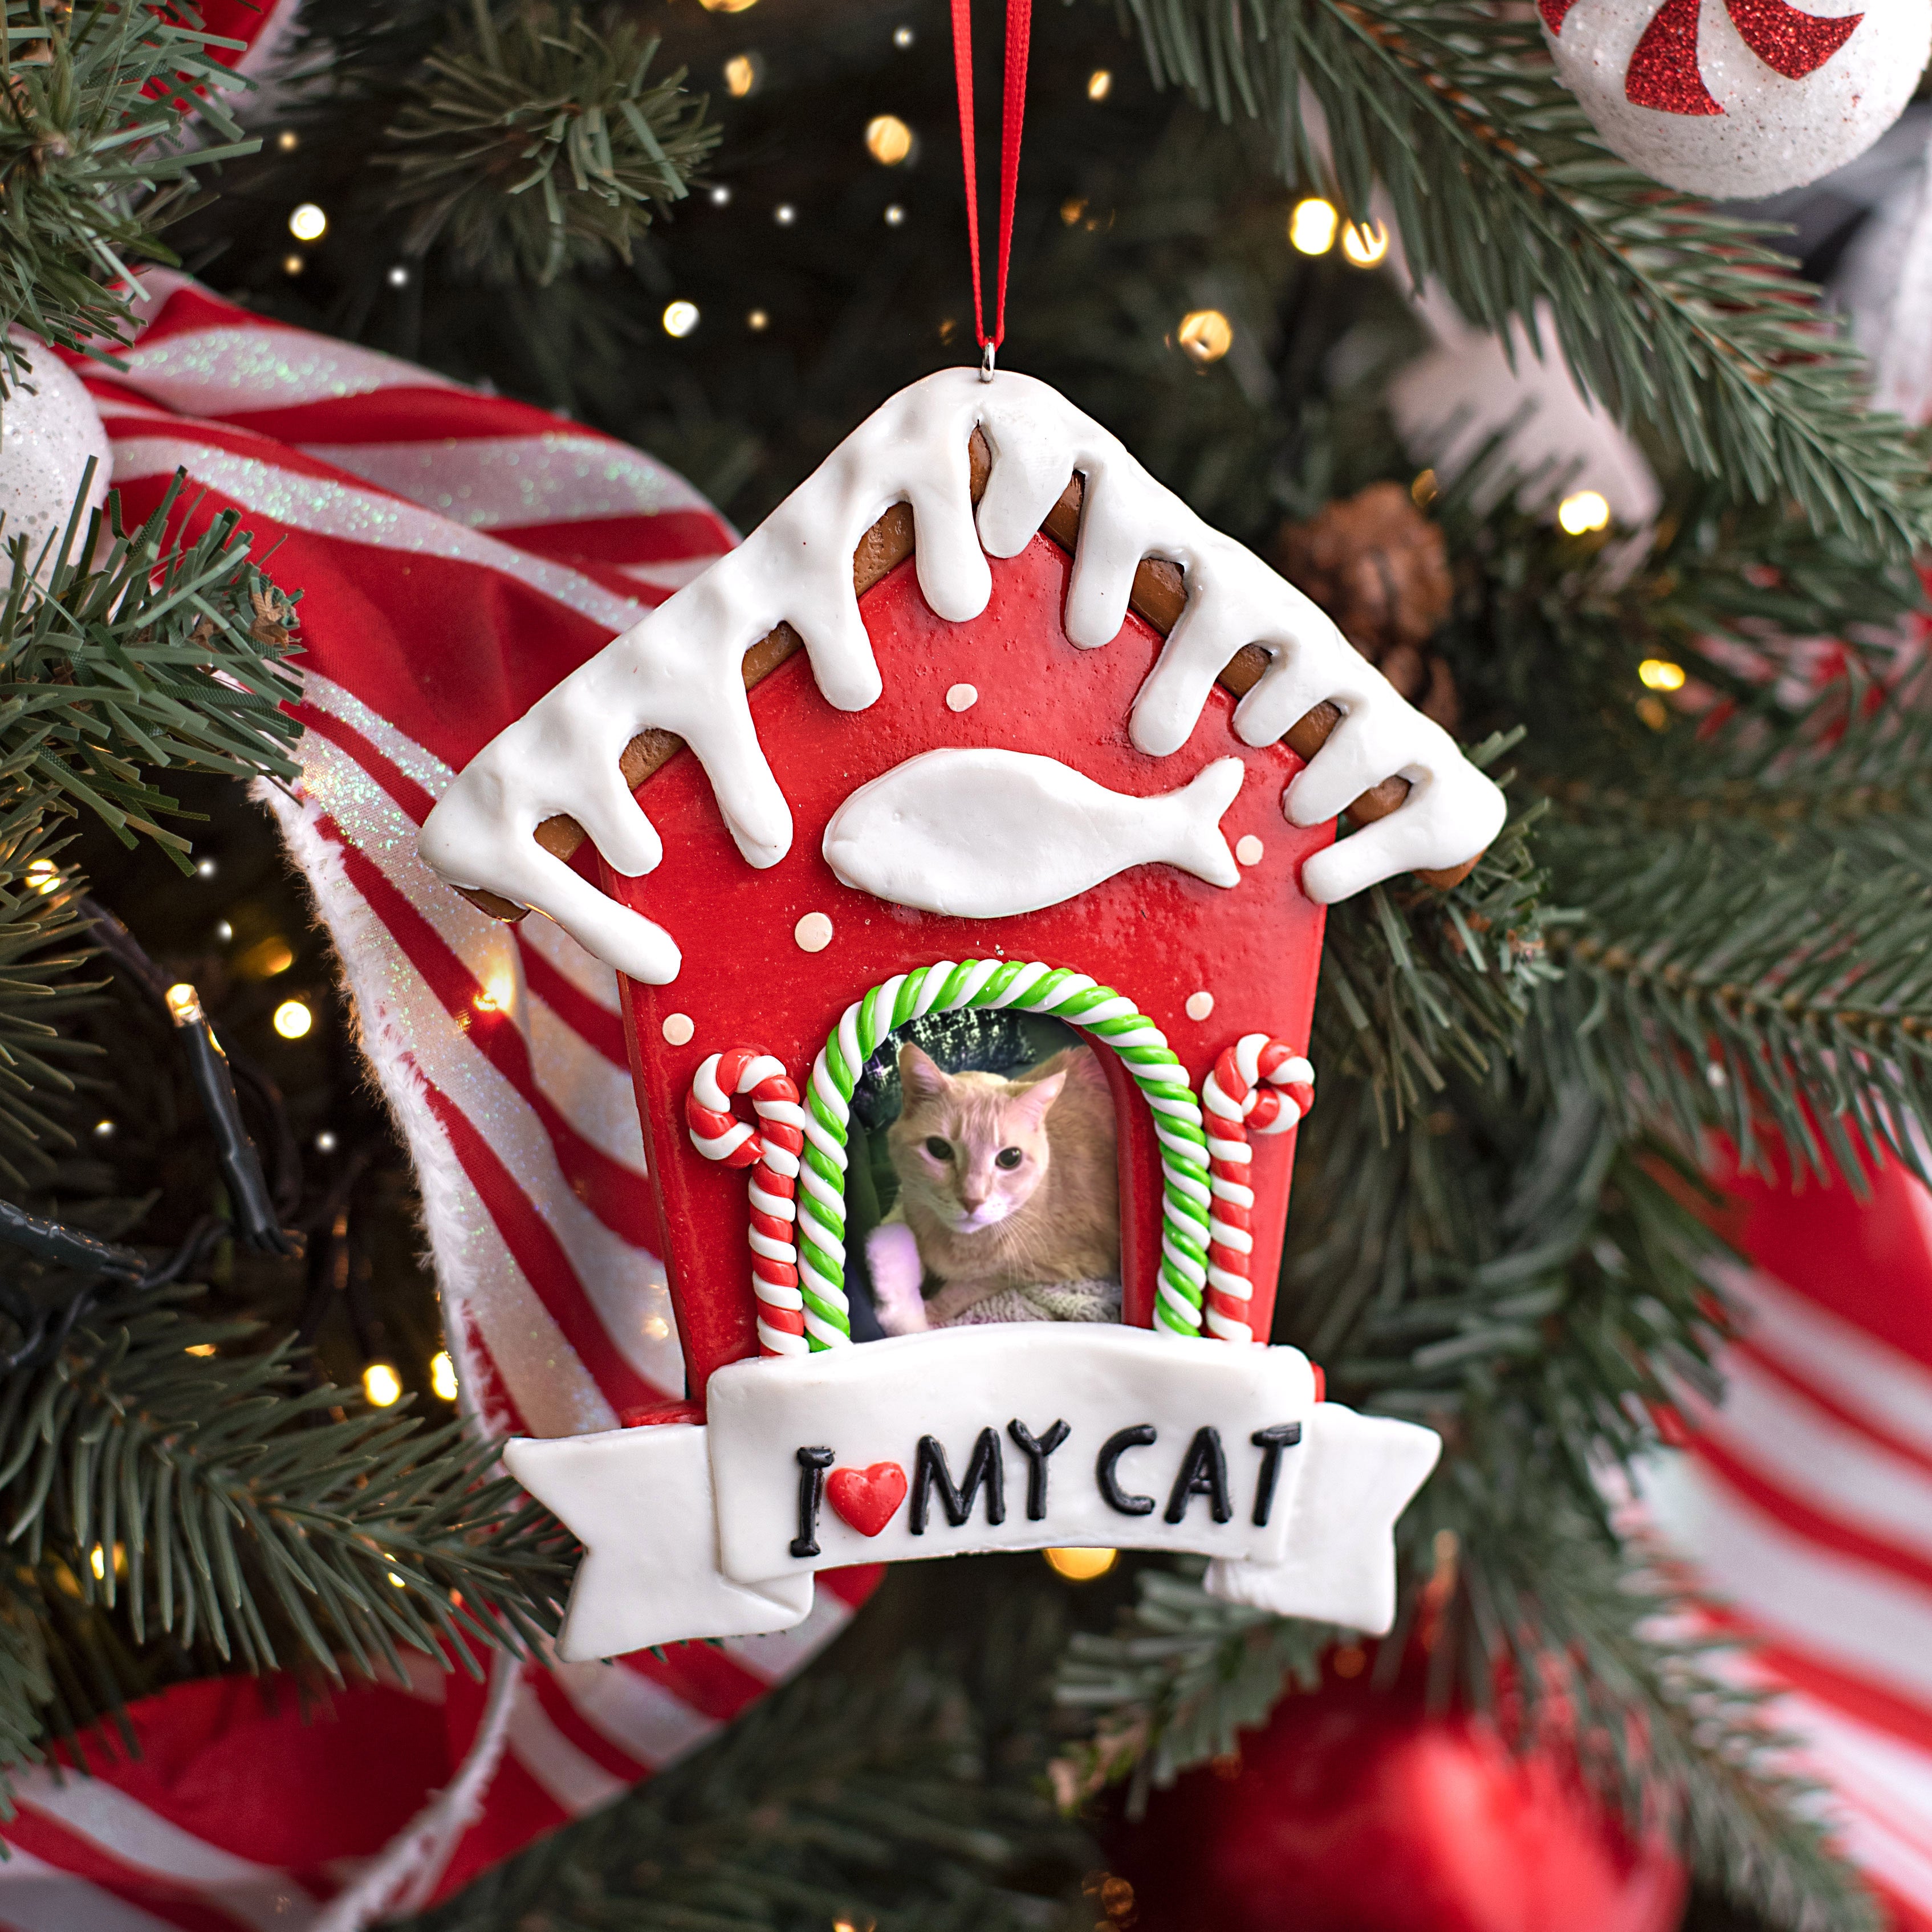 5.5" Gingerbread Cat House Photo Ornament